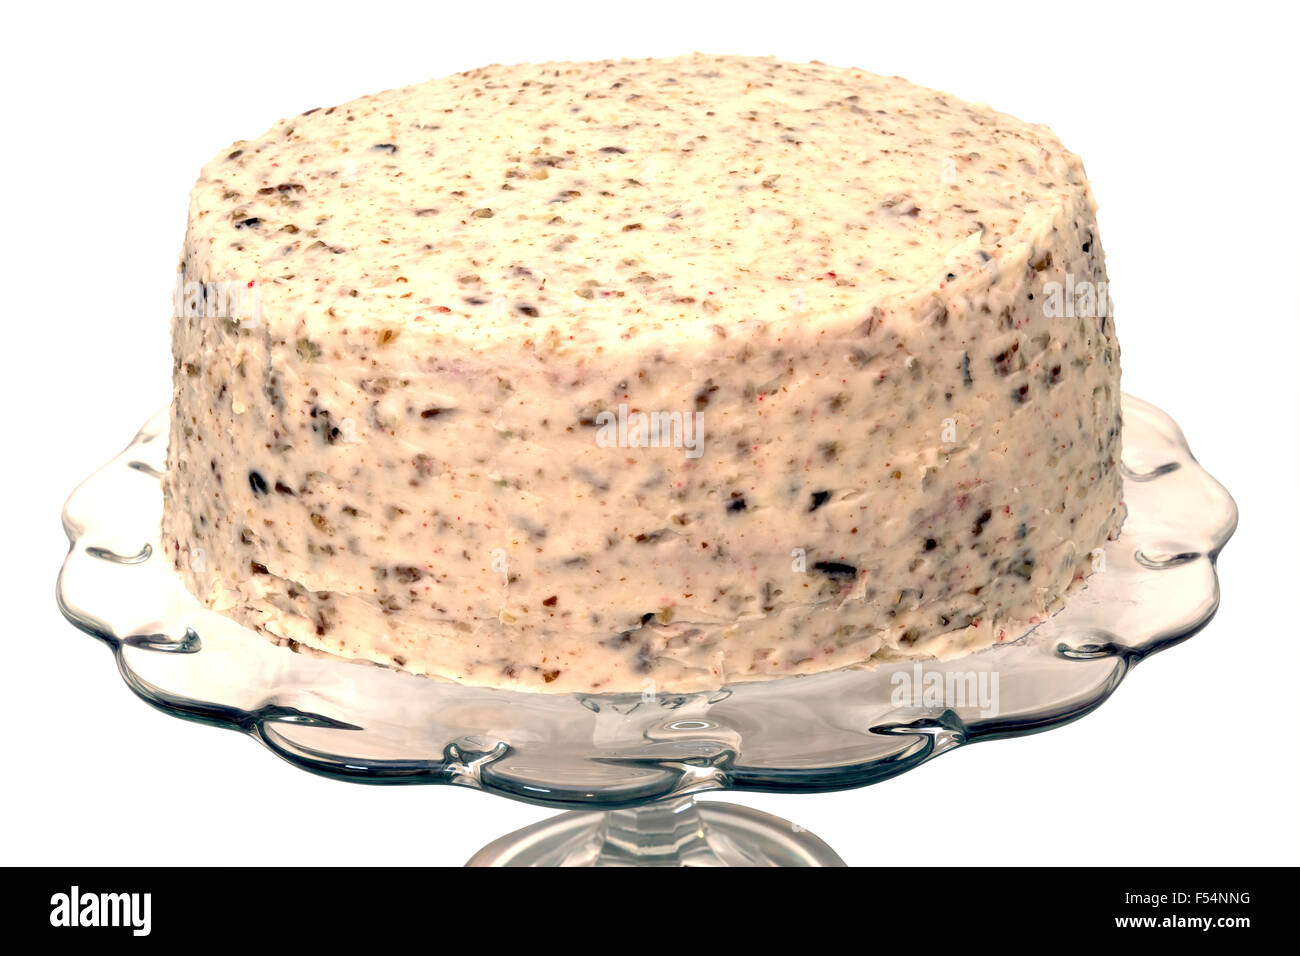 Red velvet cake isolated on white background with clipping path. Stock Photo